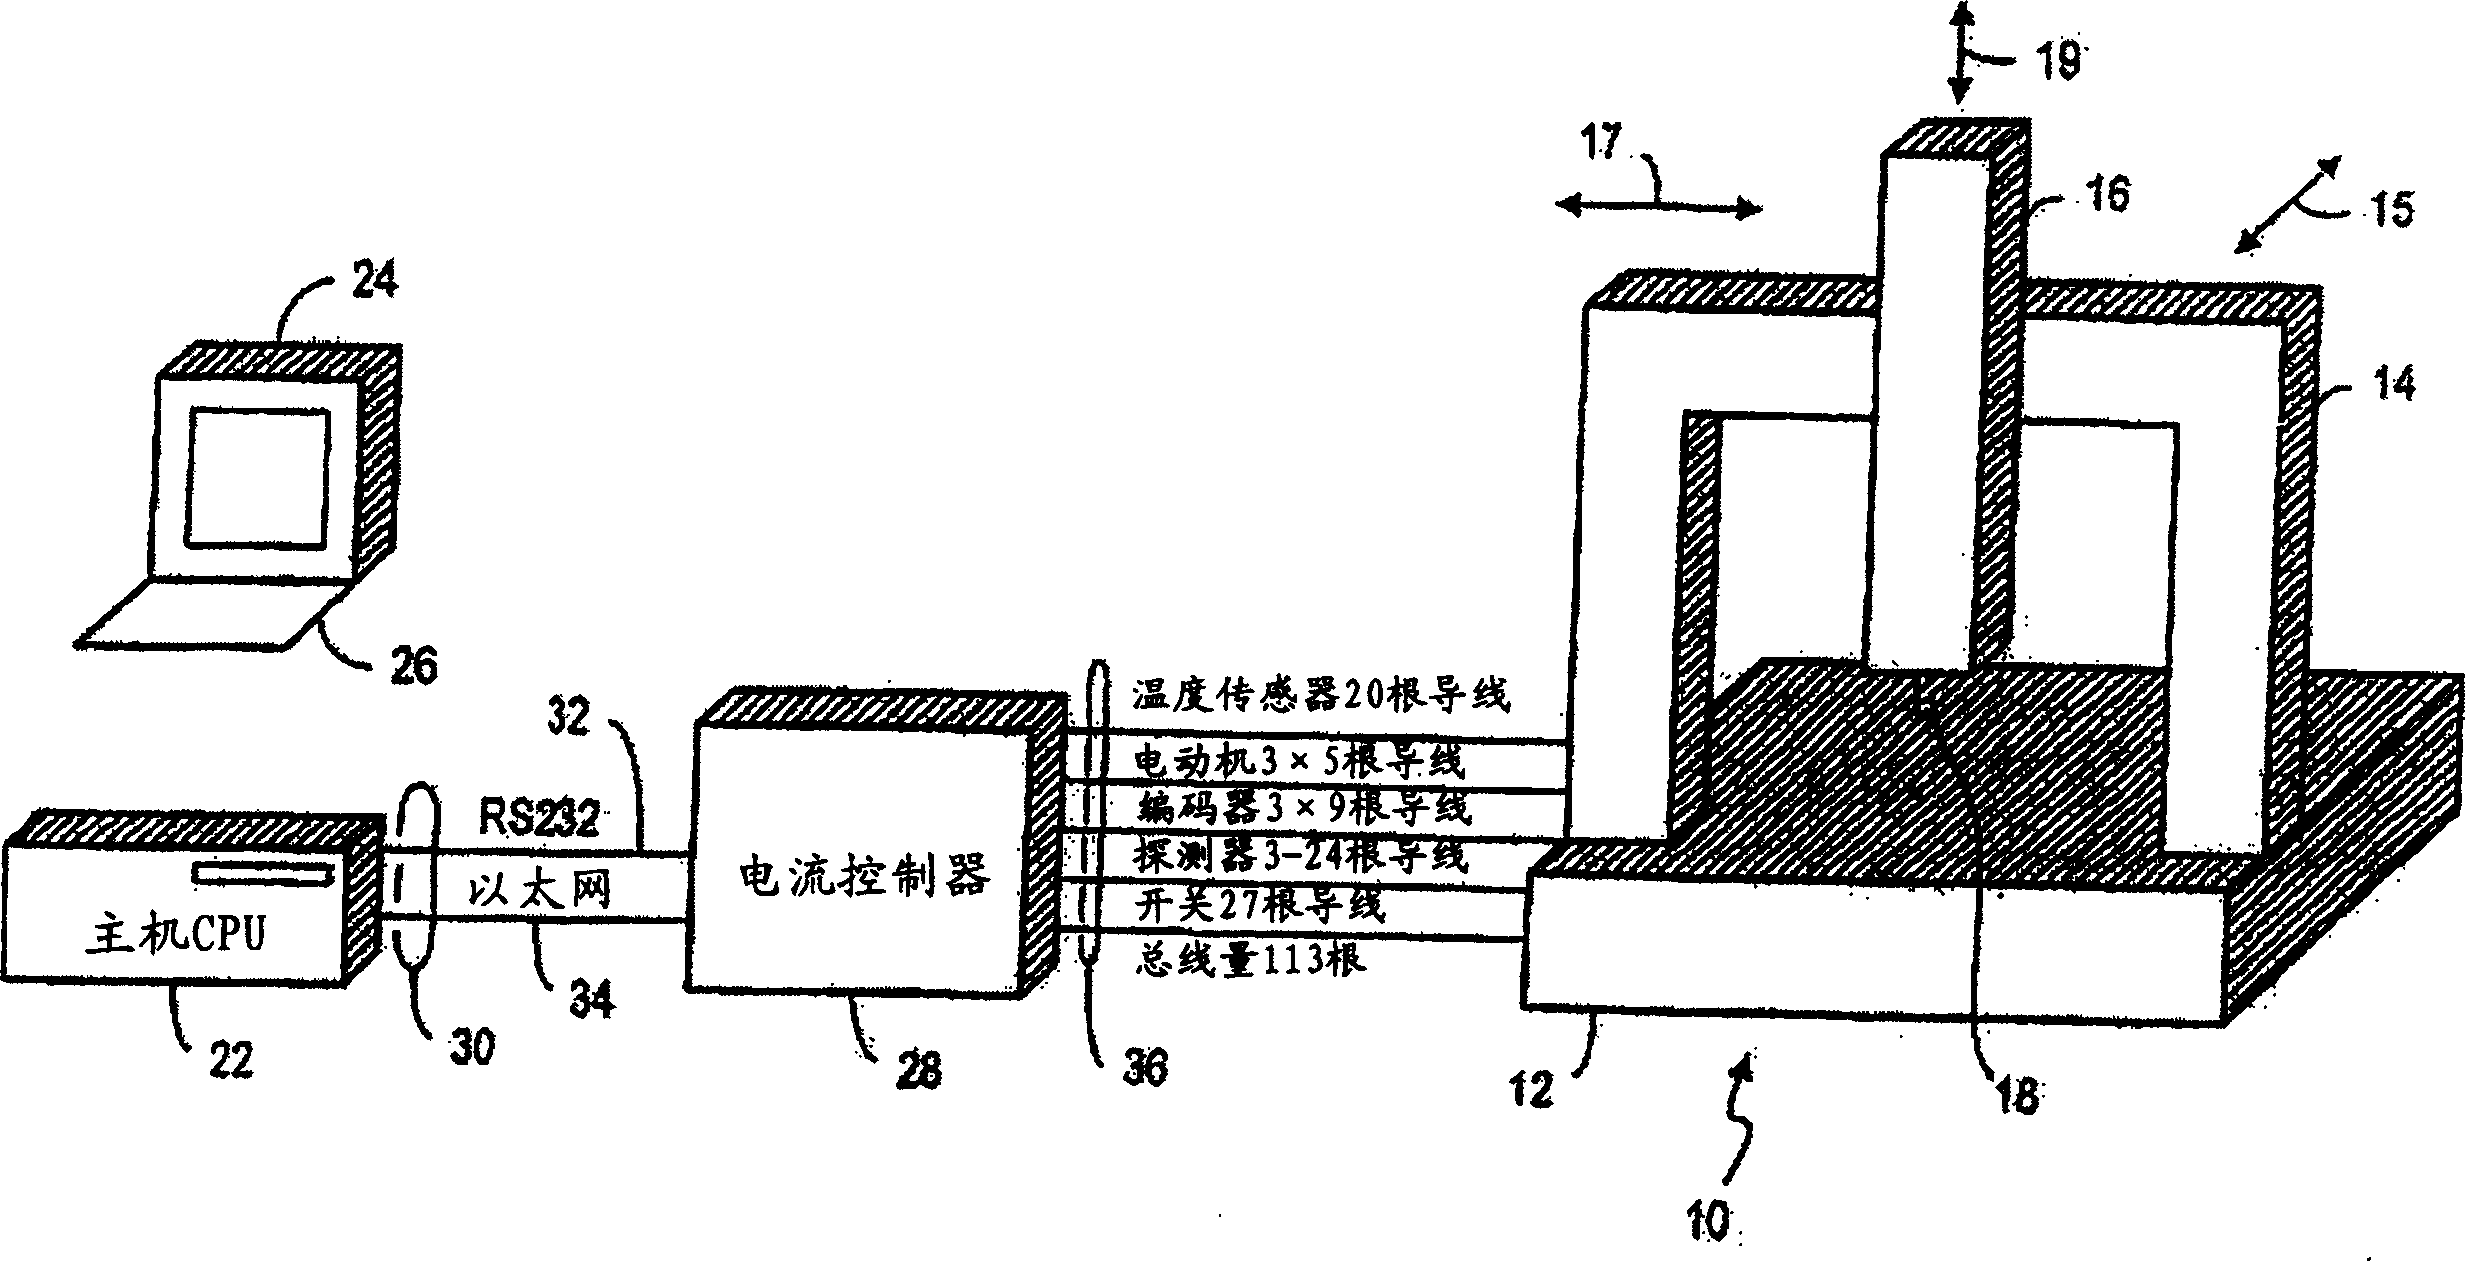 A communication method and common control bus interconnecting a controller and a precision measurement assembly